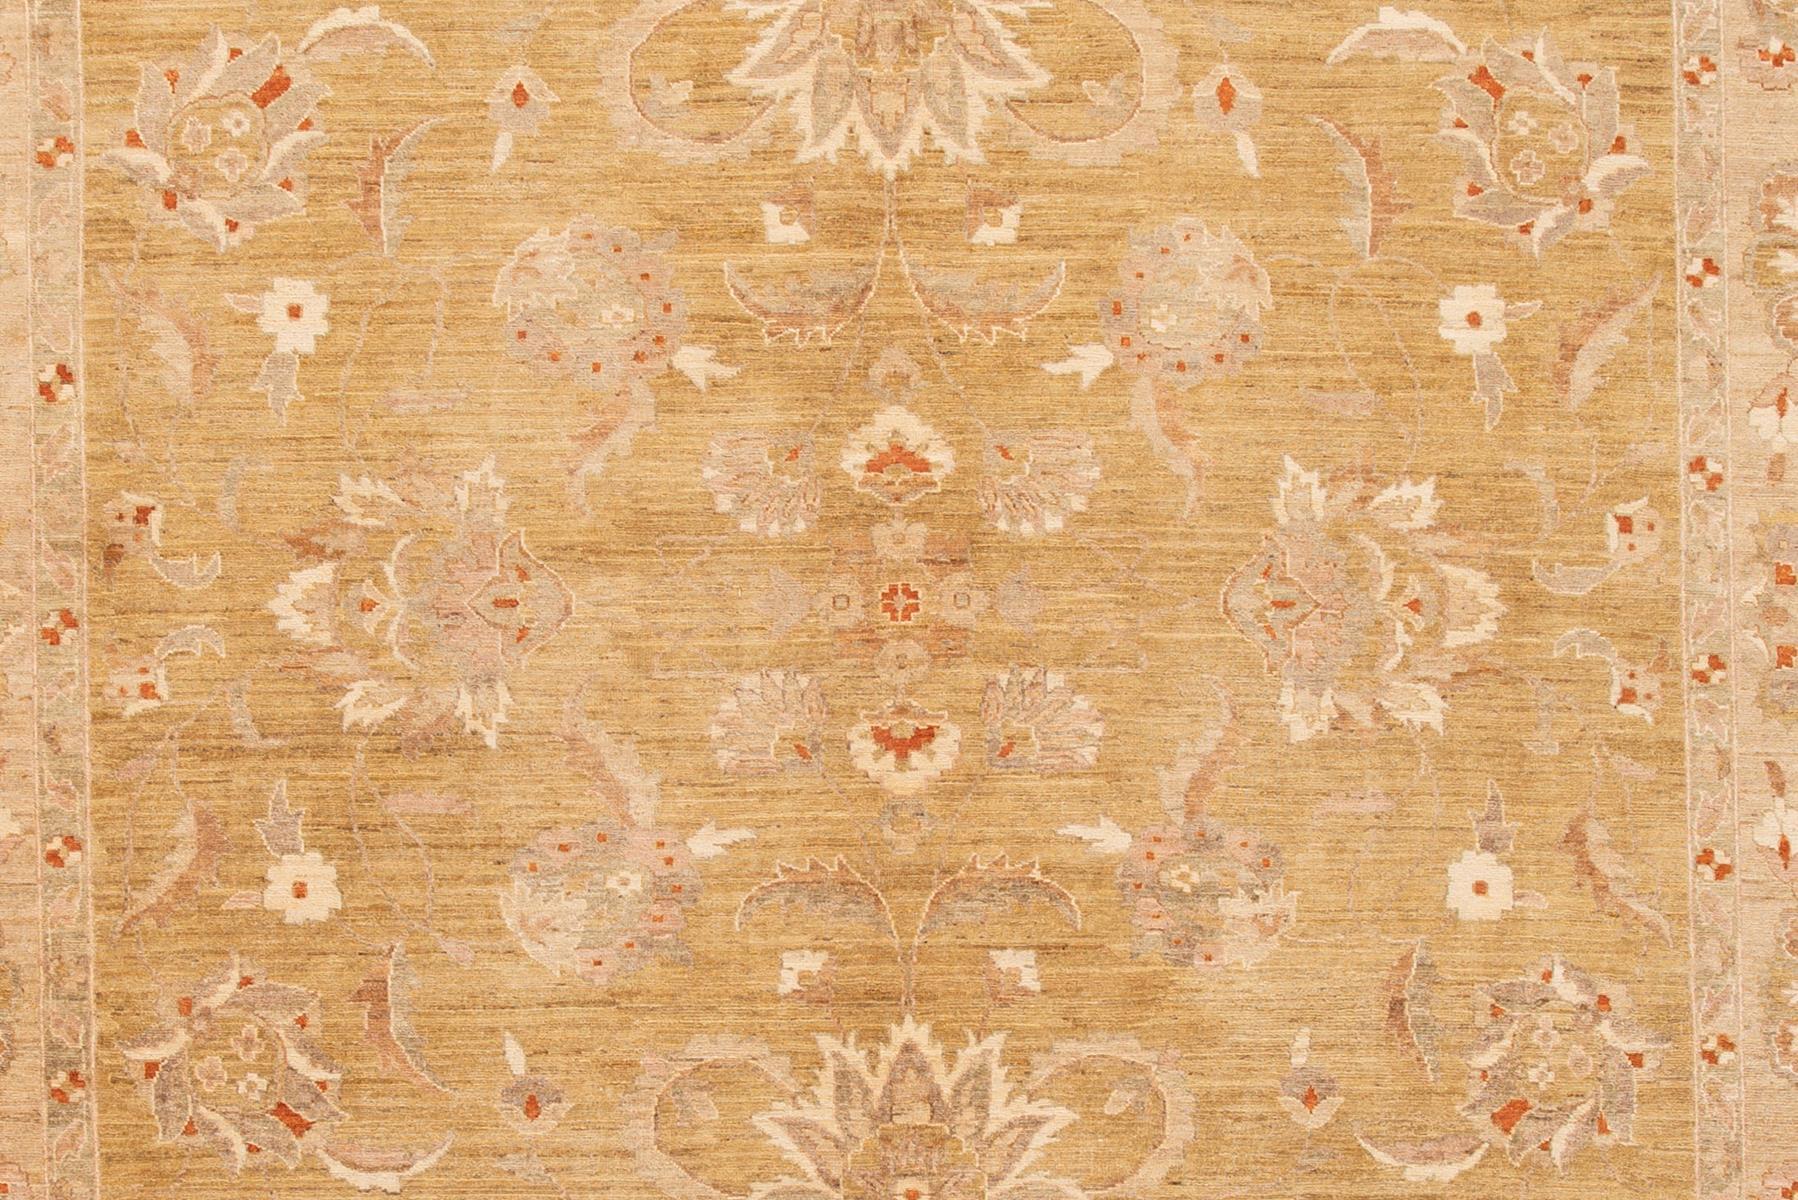 Modern Indian Peshawar hand-knotted wool rug with a tan color field. This piece has gray, beige, and rust accents in an all-over floral design. 

This rug measures 10'1